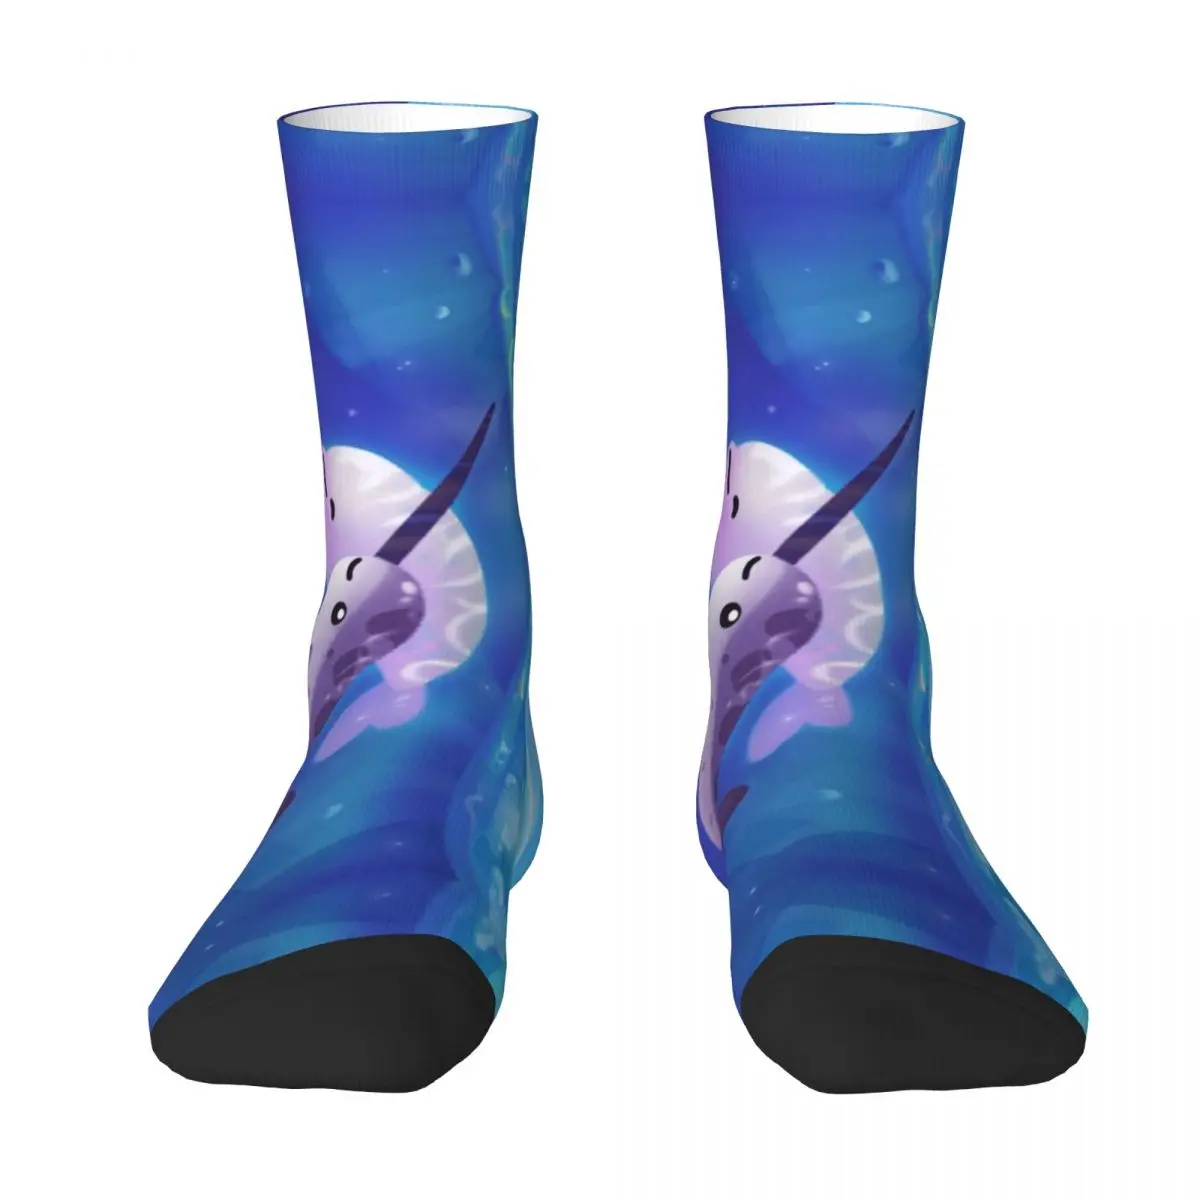 

R92 Stocking Beluga And Narwhal The Best Buy Funny Novelty Rucksack Compression Socks